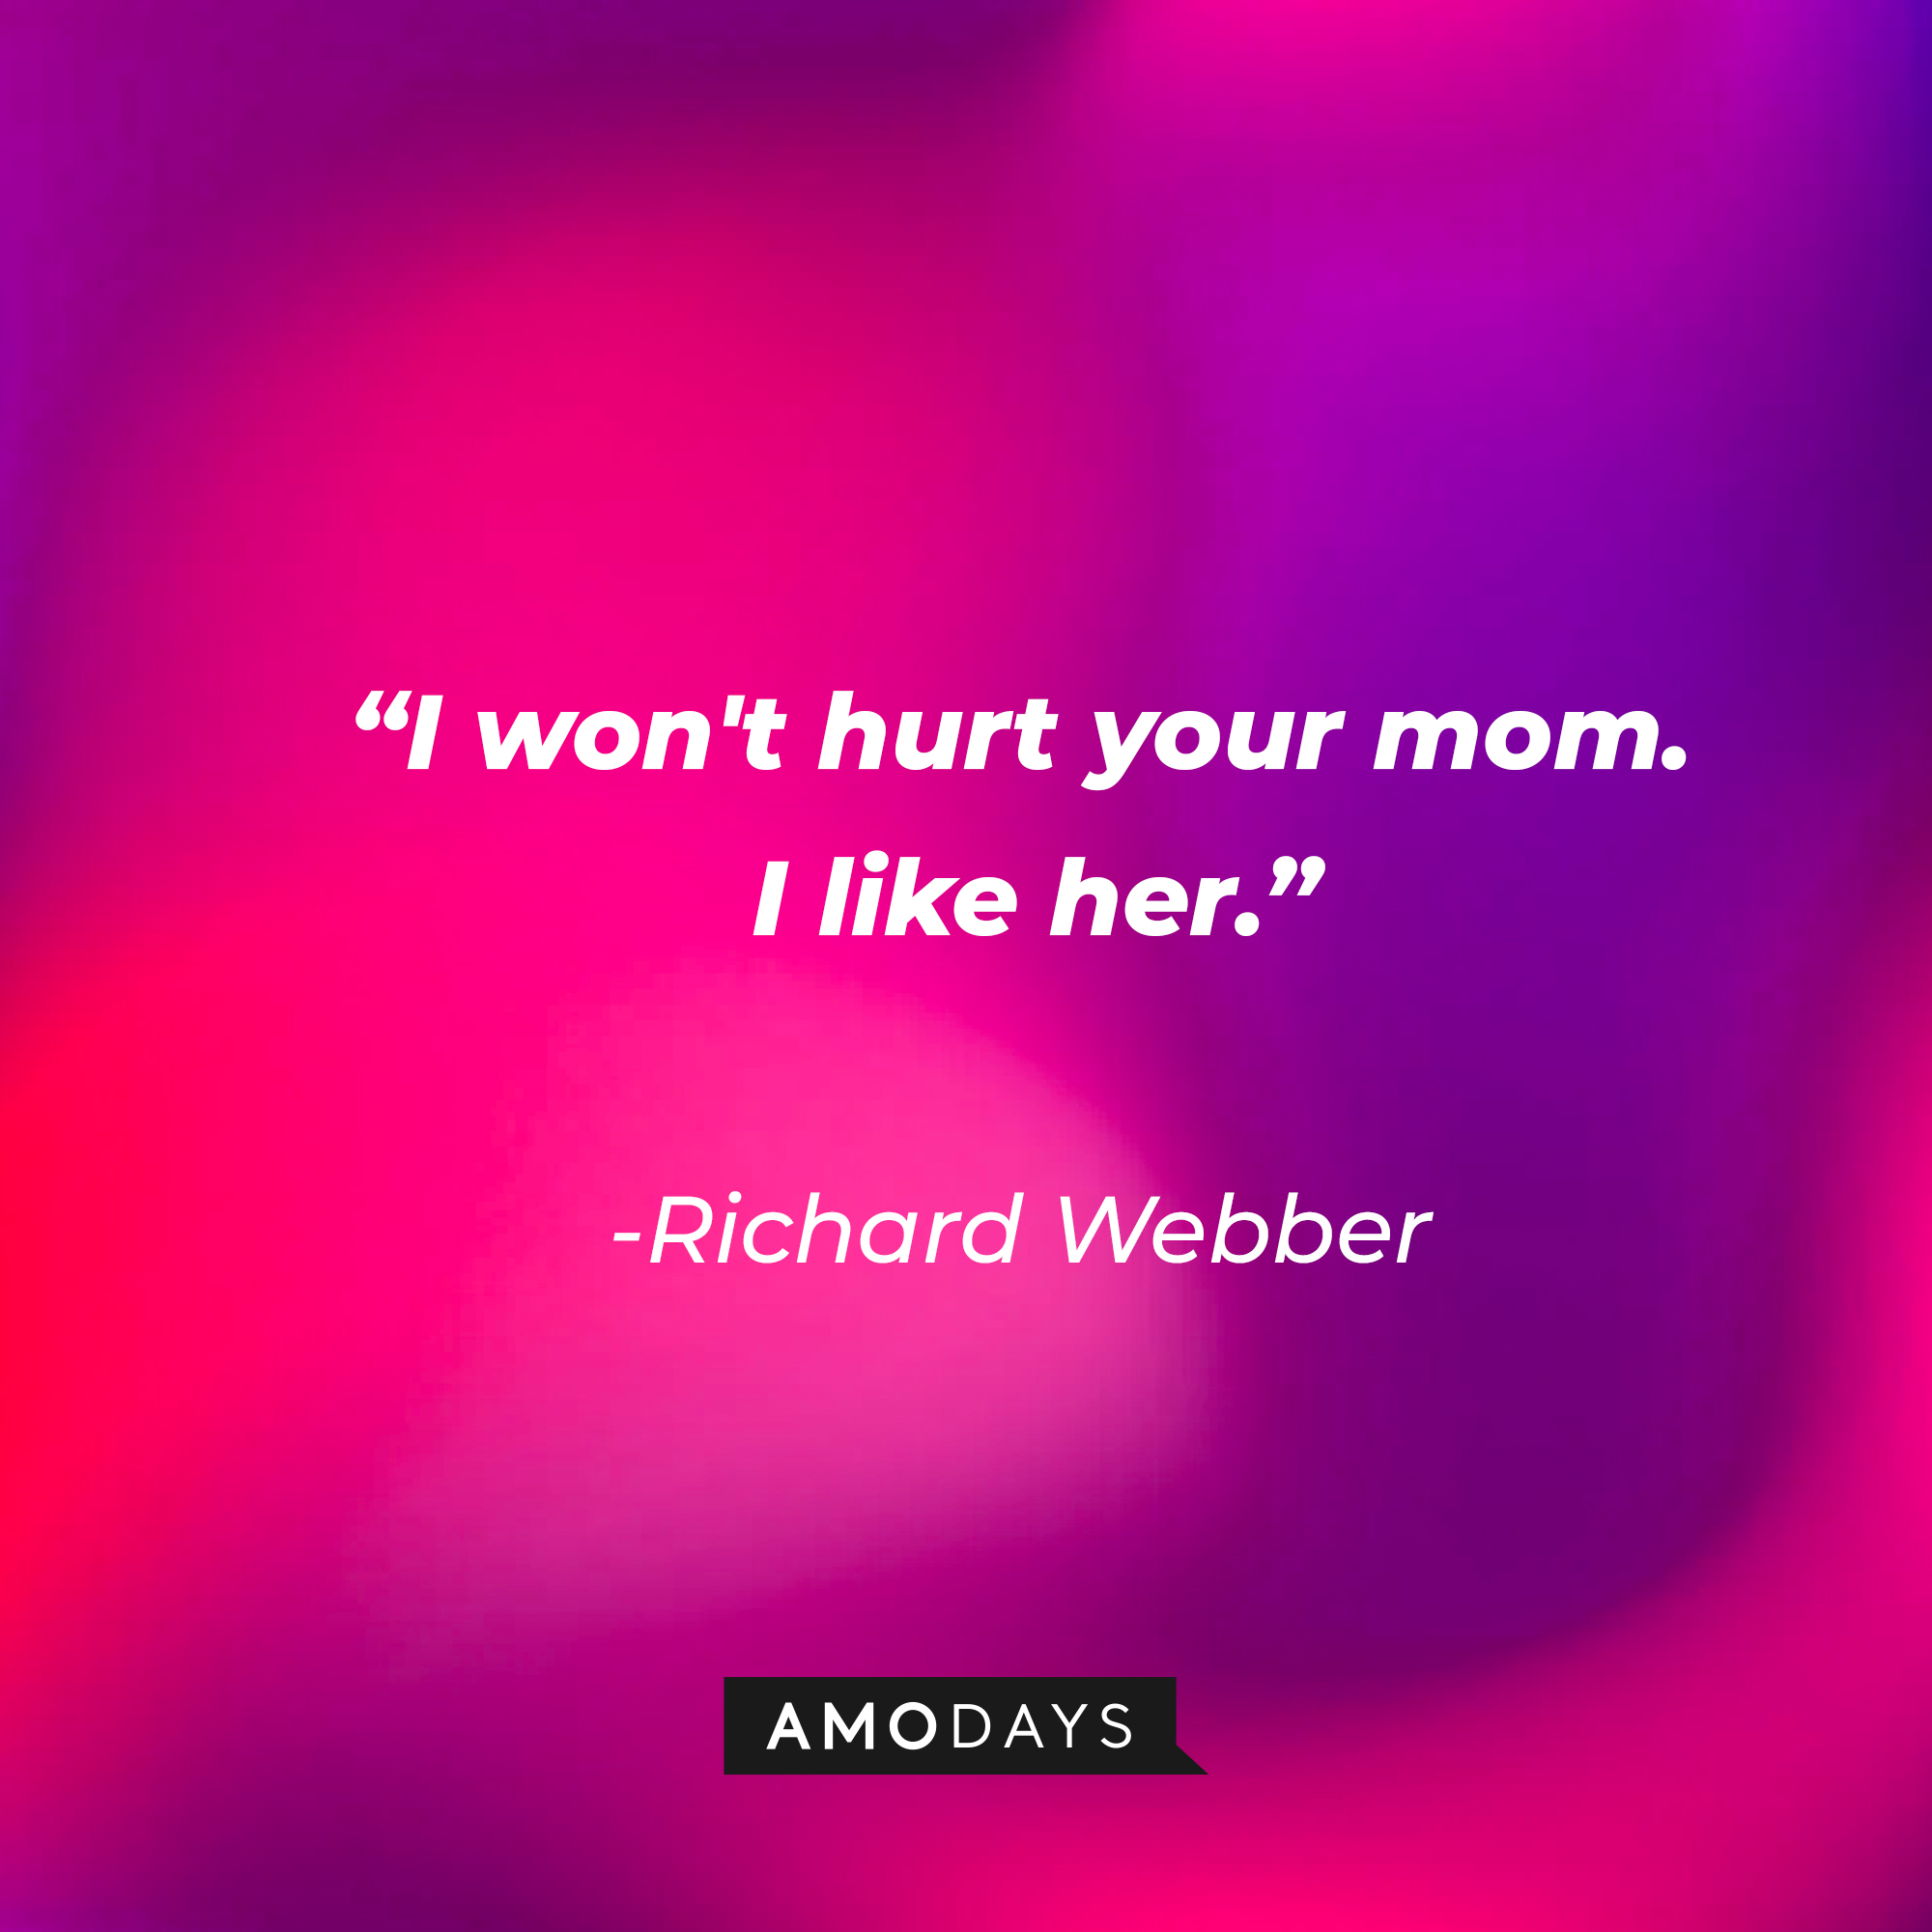 Richard Webber with his quote: "I won't hurt your mom. I like her." | Source: Amodays